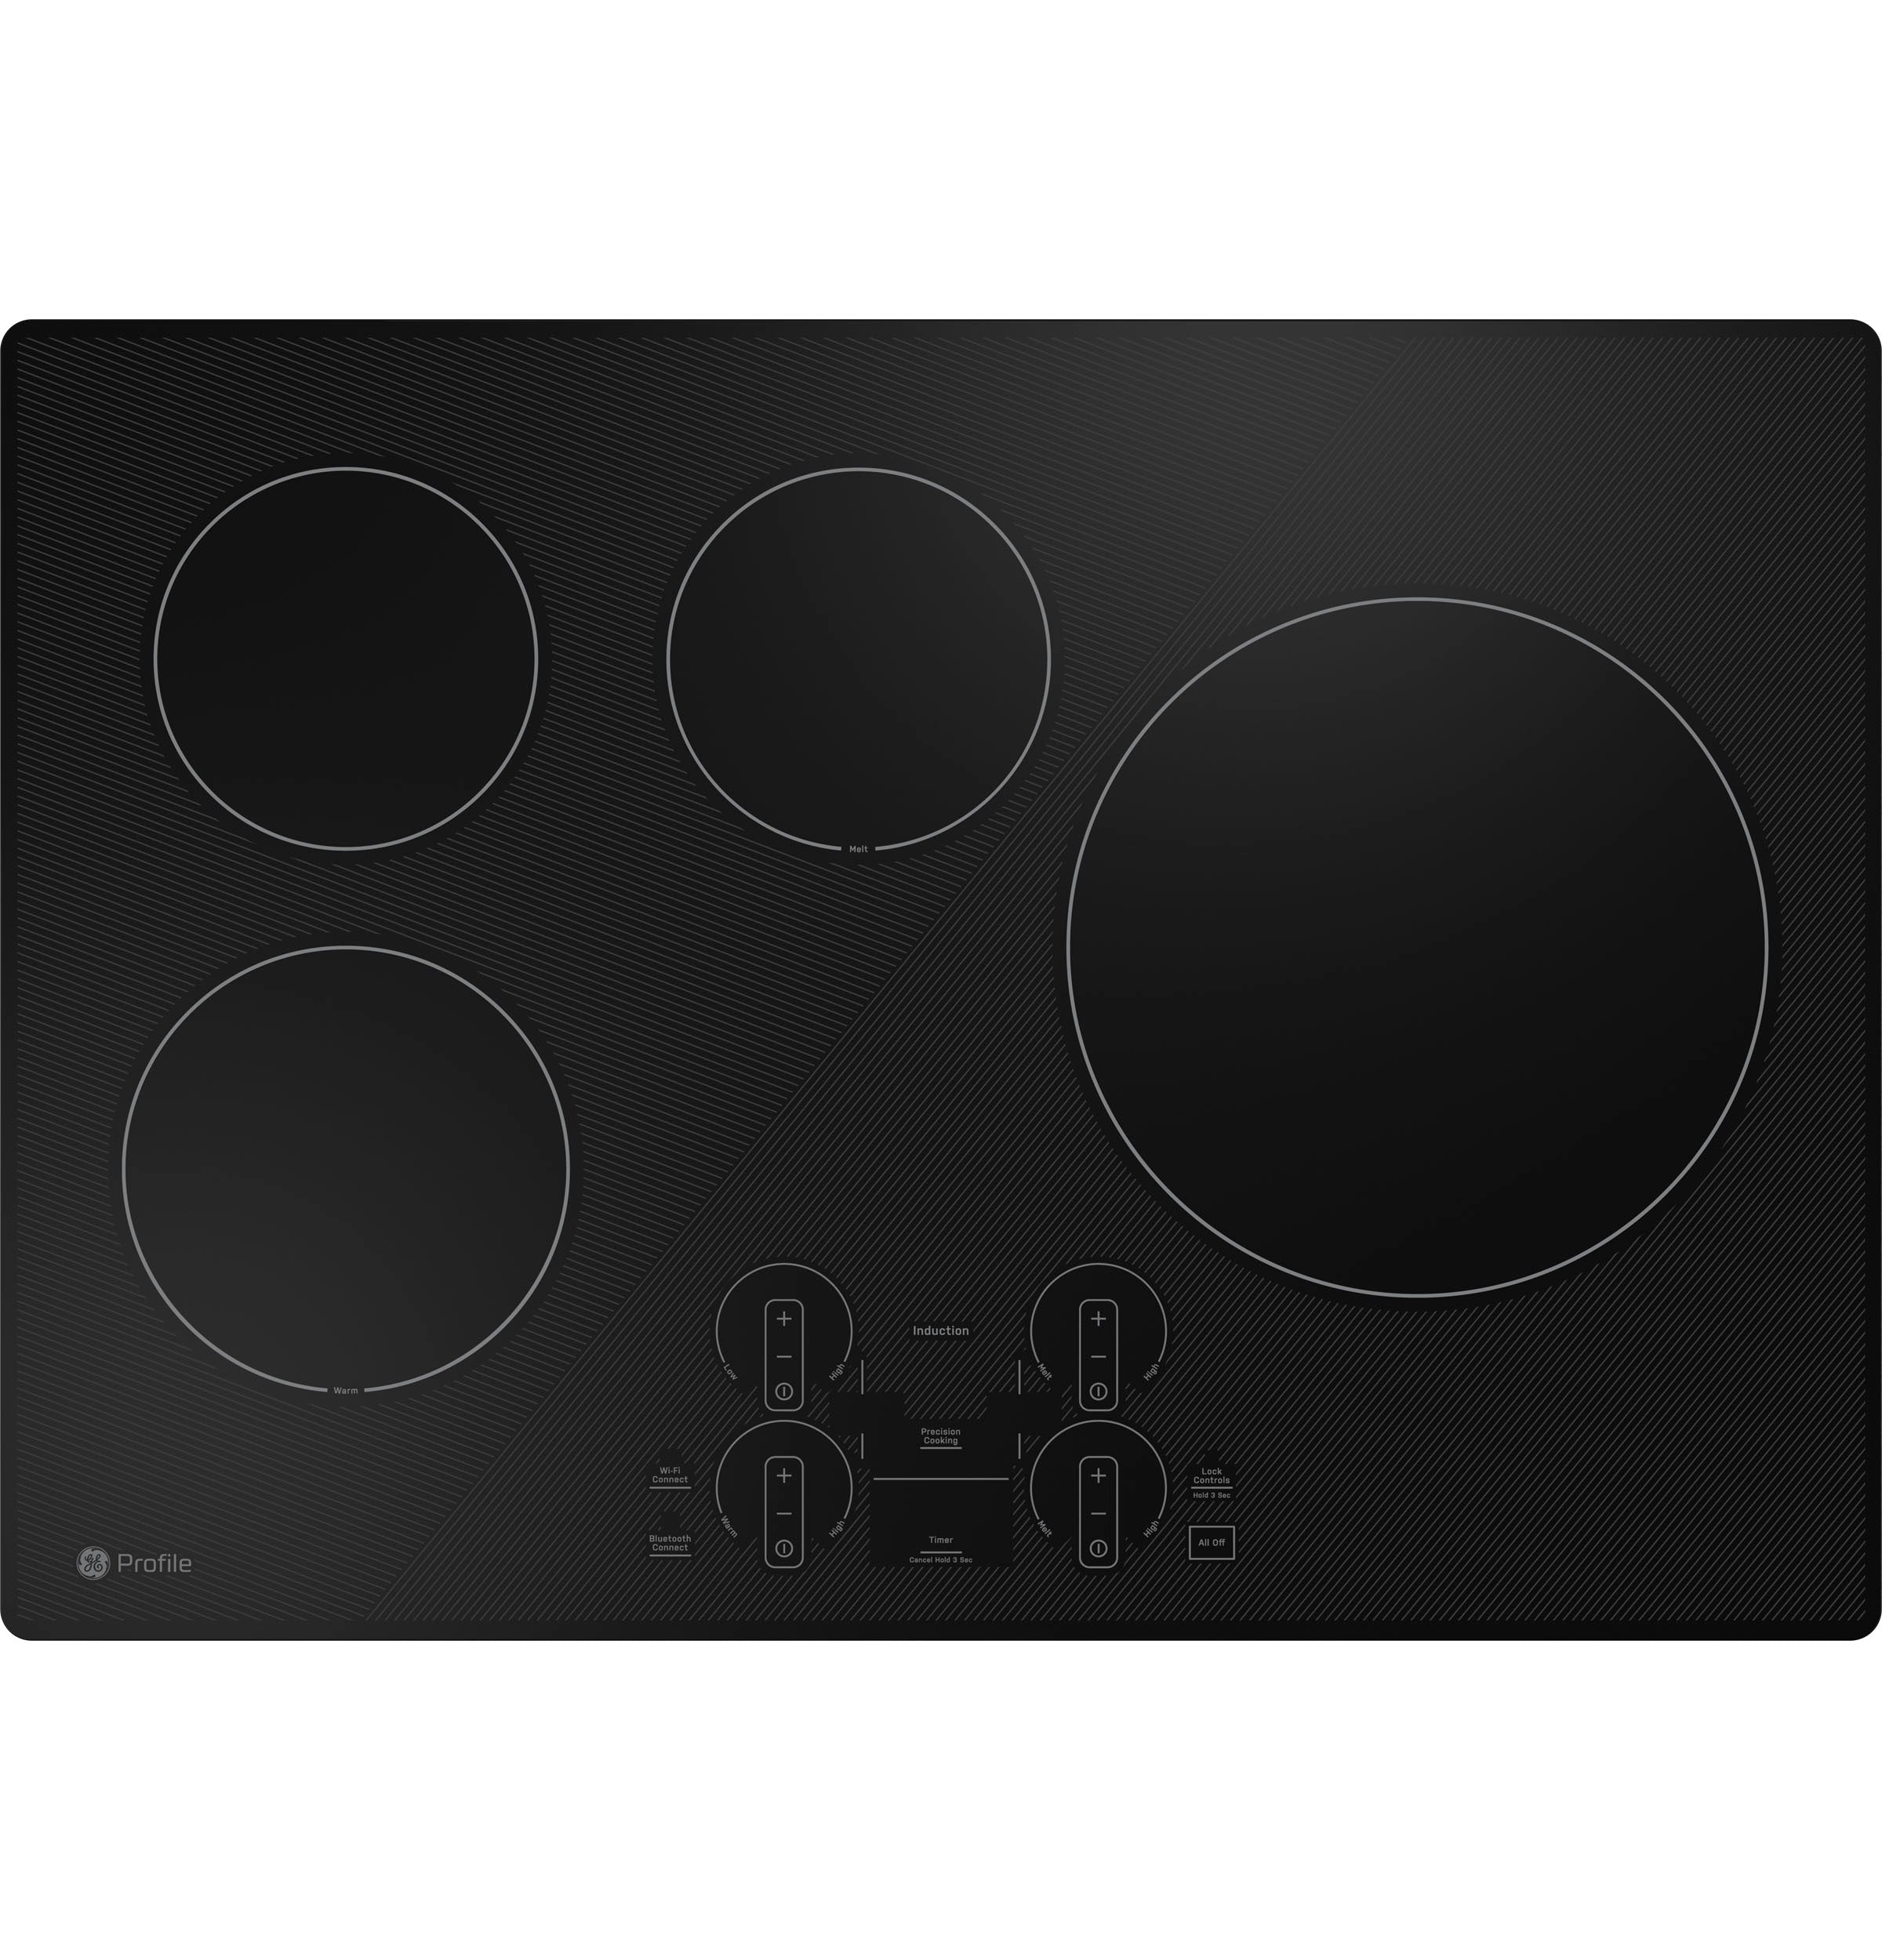 GE Profile - 15.88 Inch Induction Cooktop in Black - PHP7030DTBB